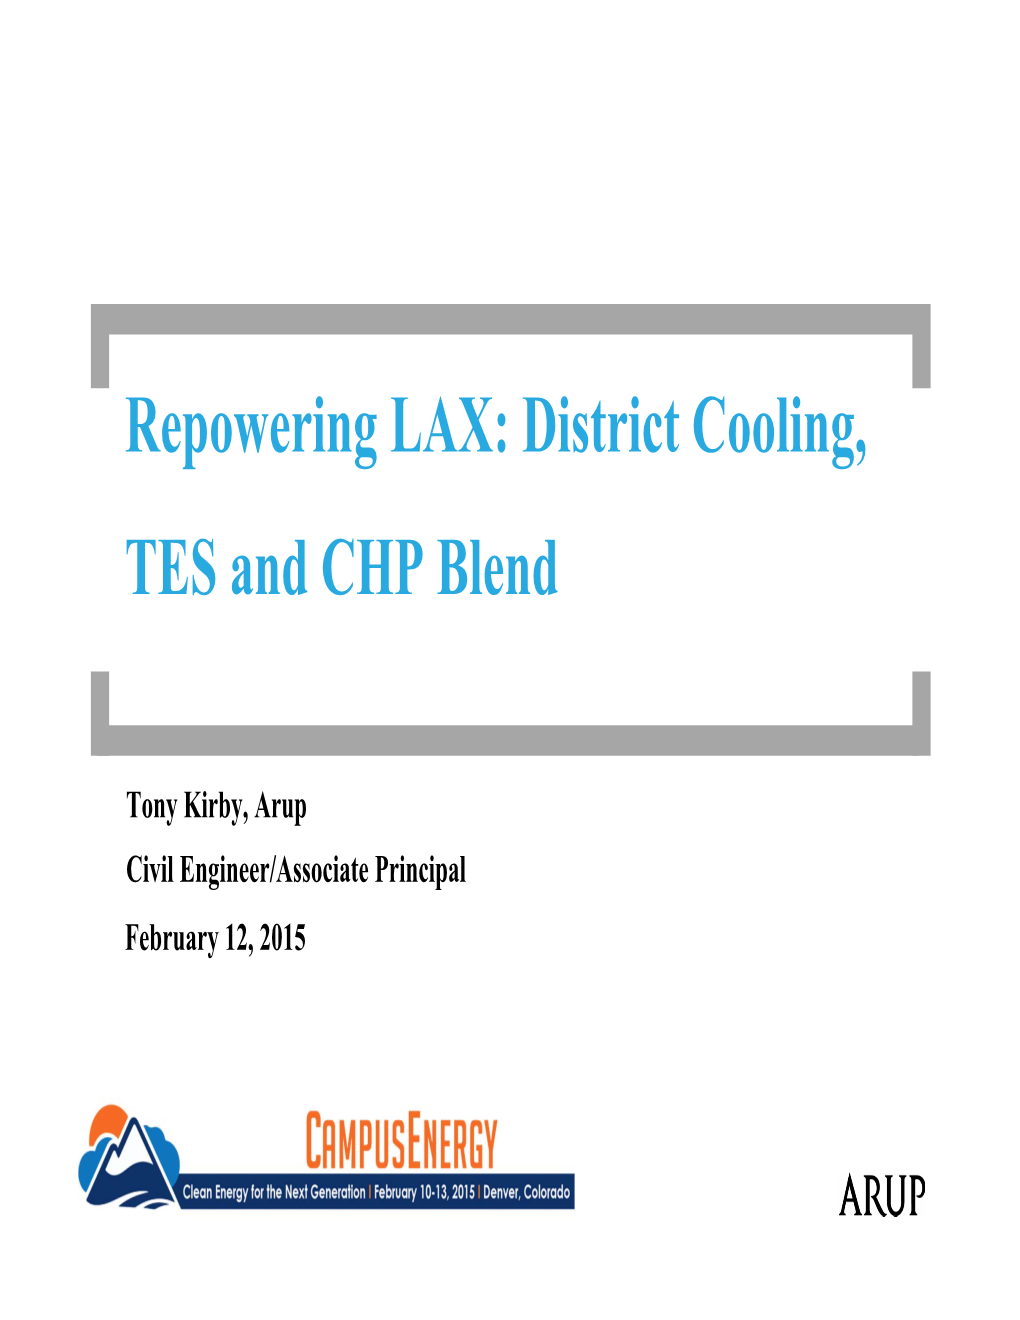 Repowering LAX: District Cooling, TES and CHP Blend